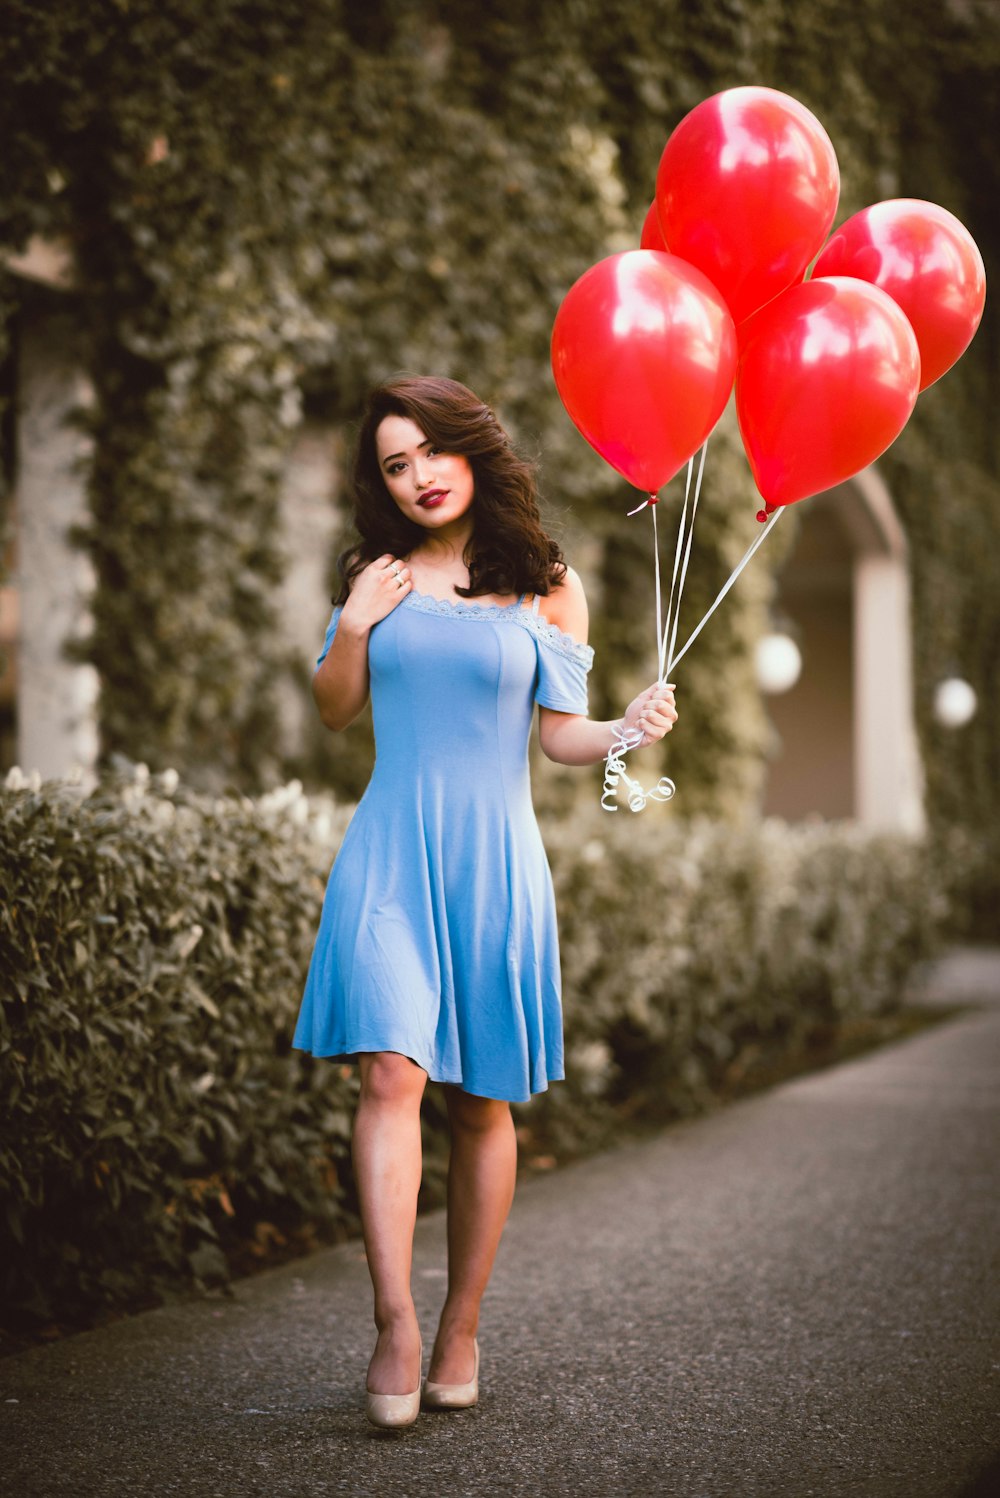 woman in blue sleeveless dress holding red balloons